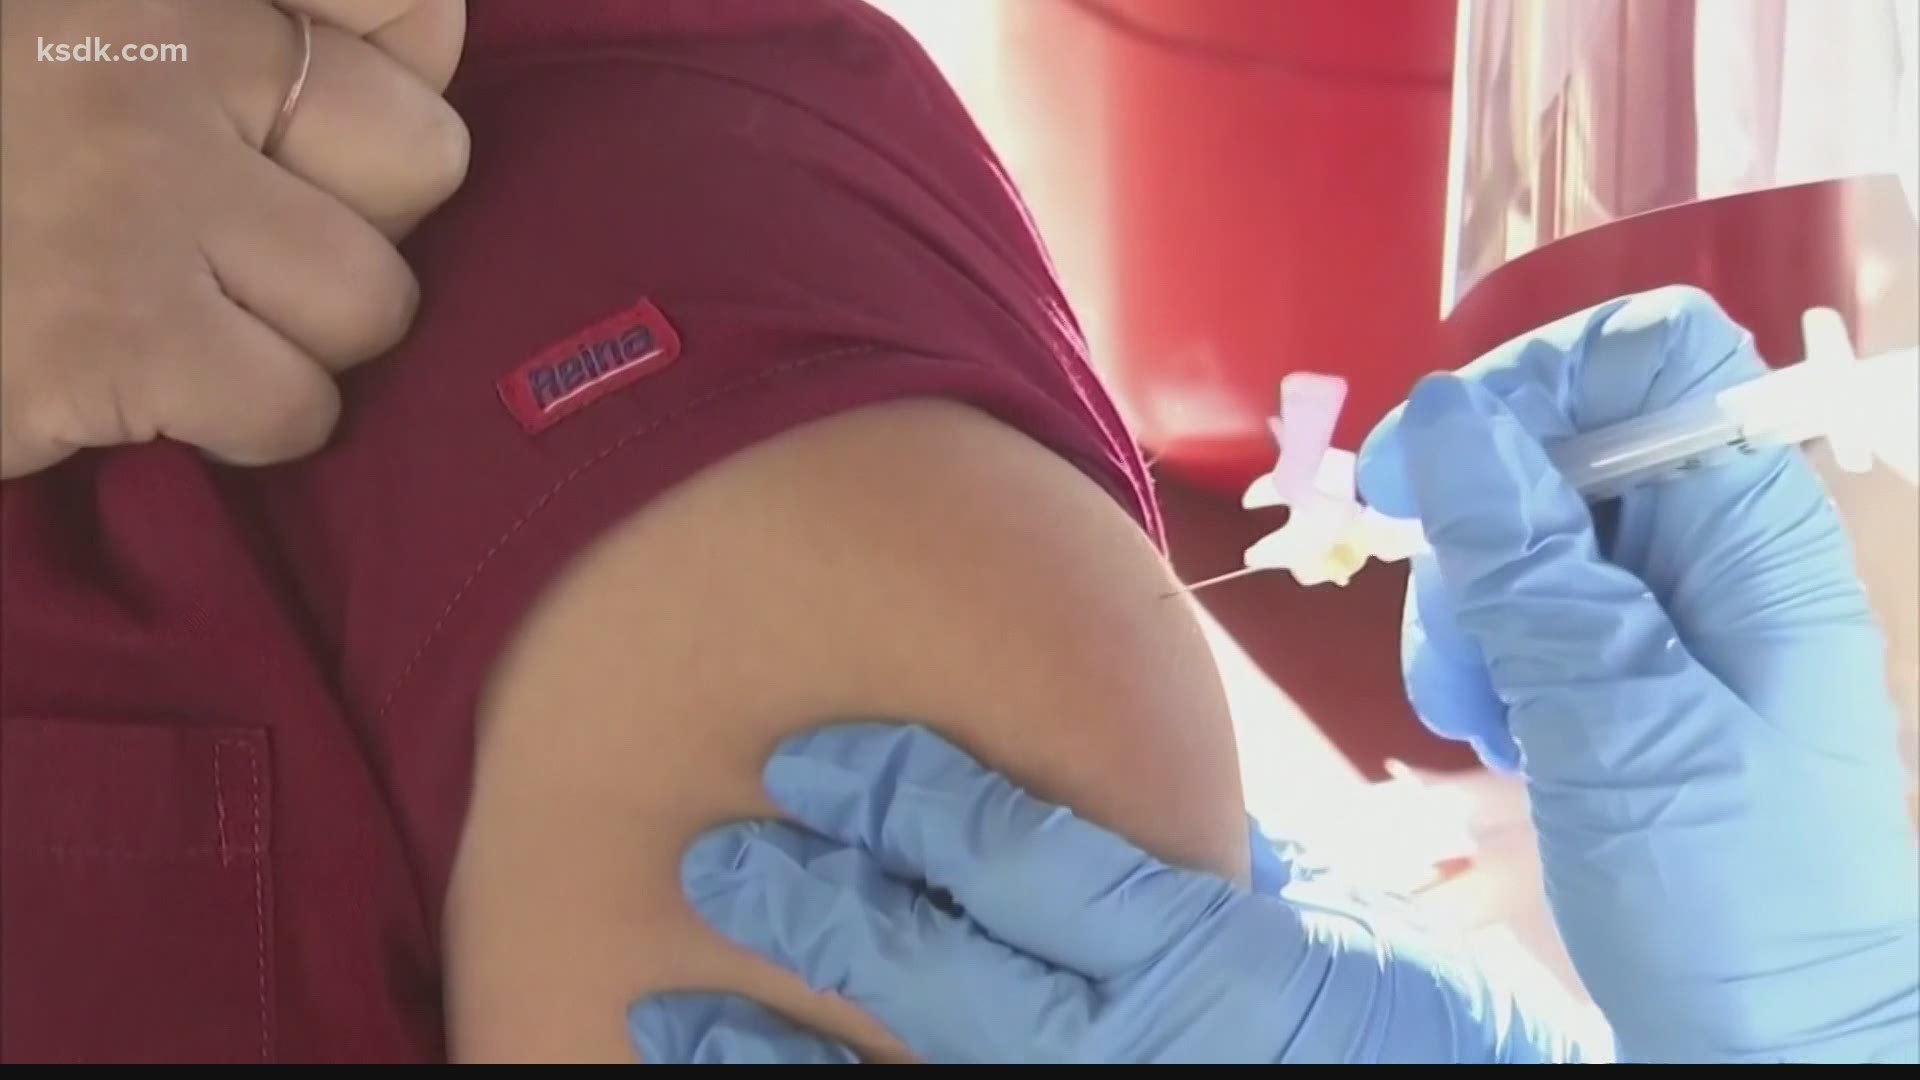 Some Missouri dentists say they can improve the vaccine rollout by administering shots themselves.